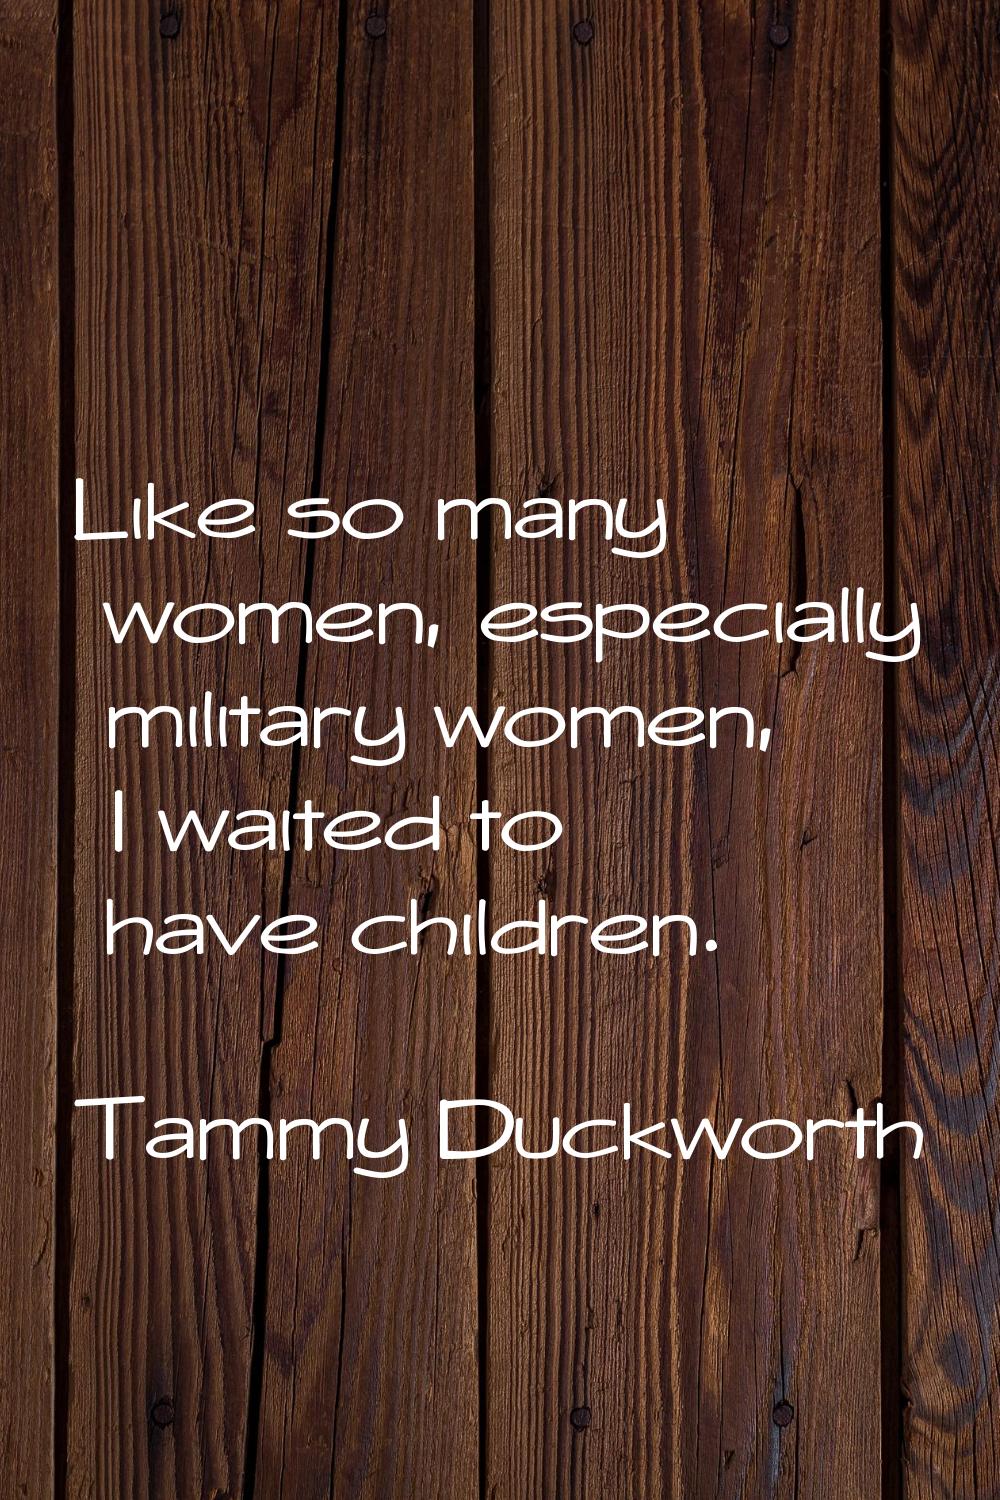 Like so many women, especially military women, I waited to have children.